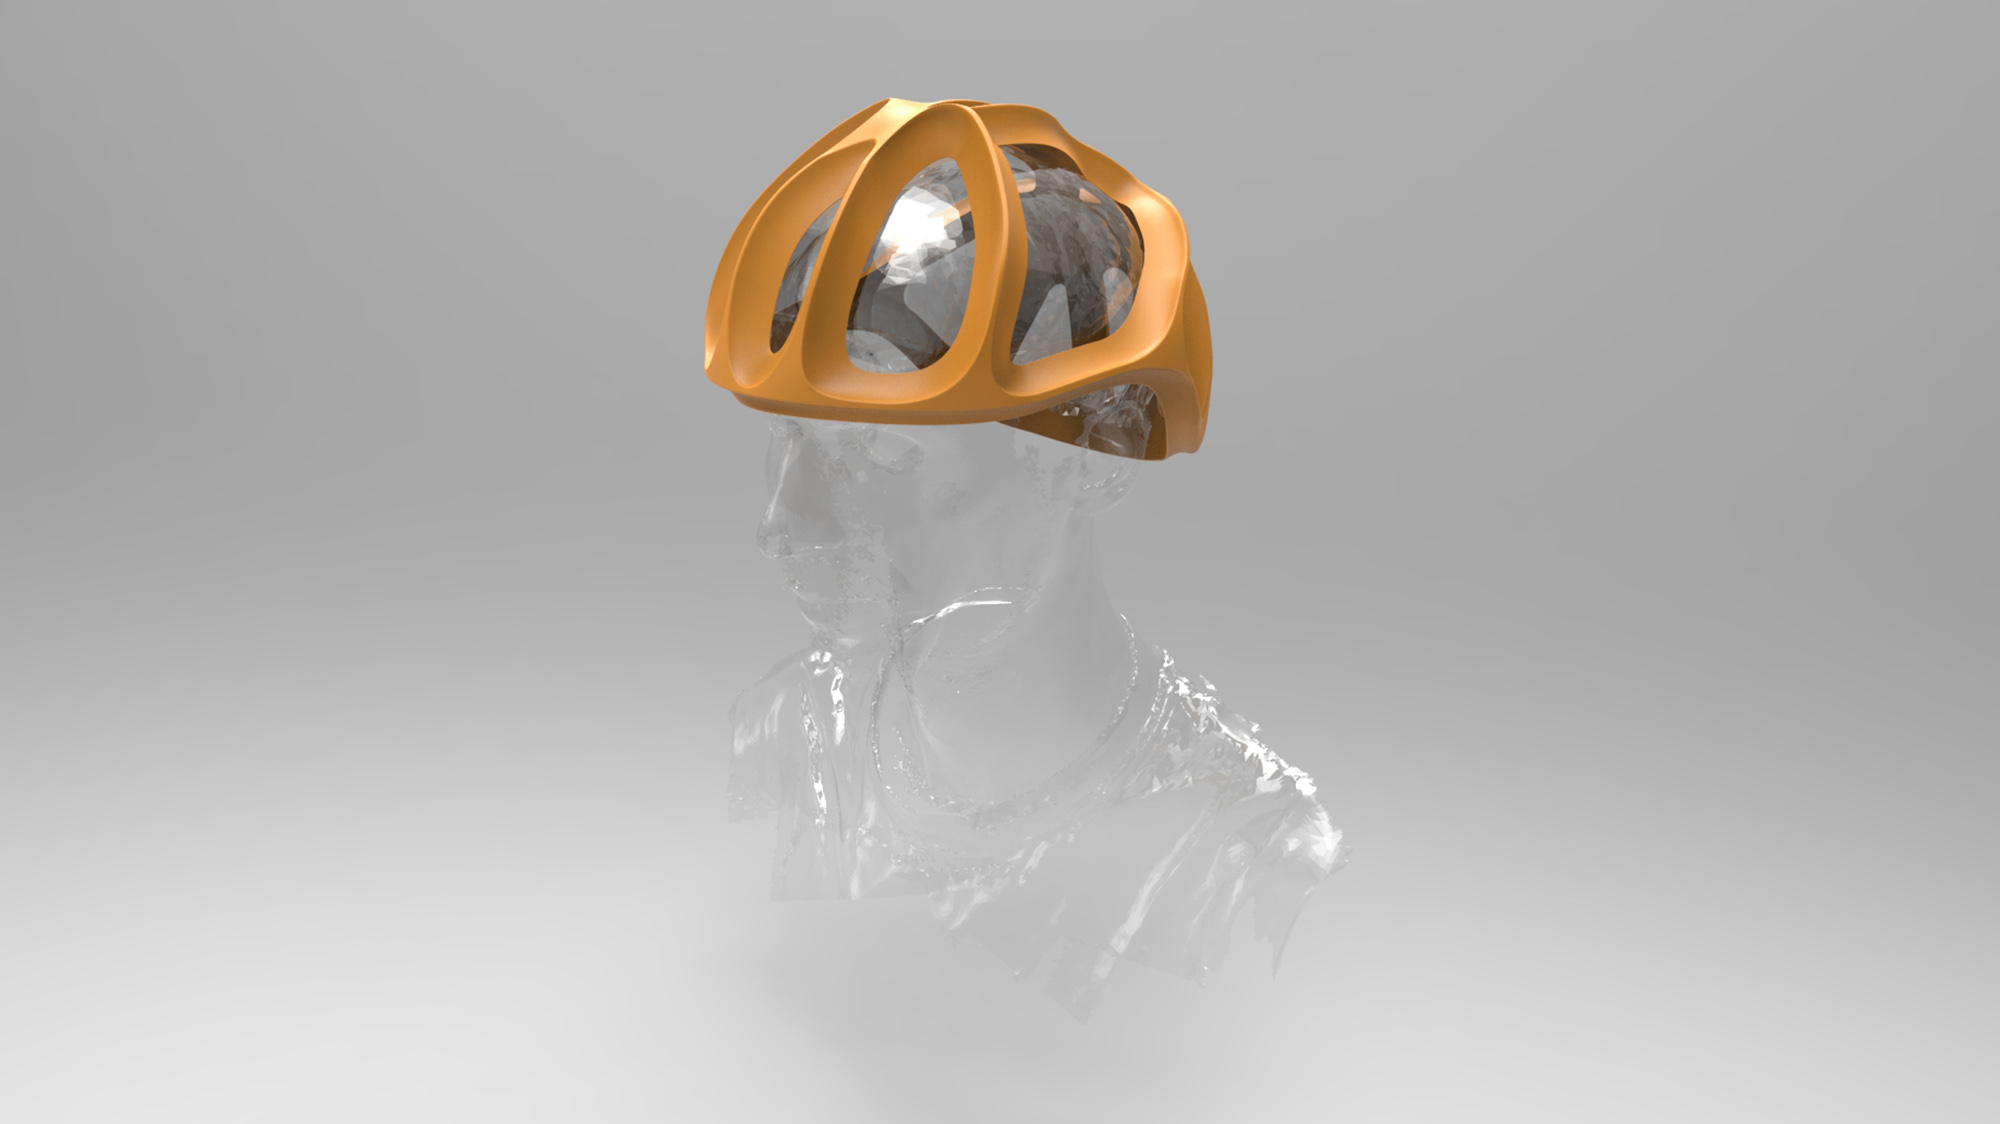 sakte helmet, first draft inspired by the results of the topology calculations (photo: Ronny Haberer)